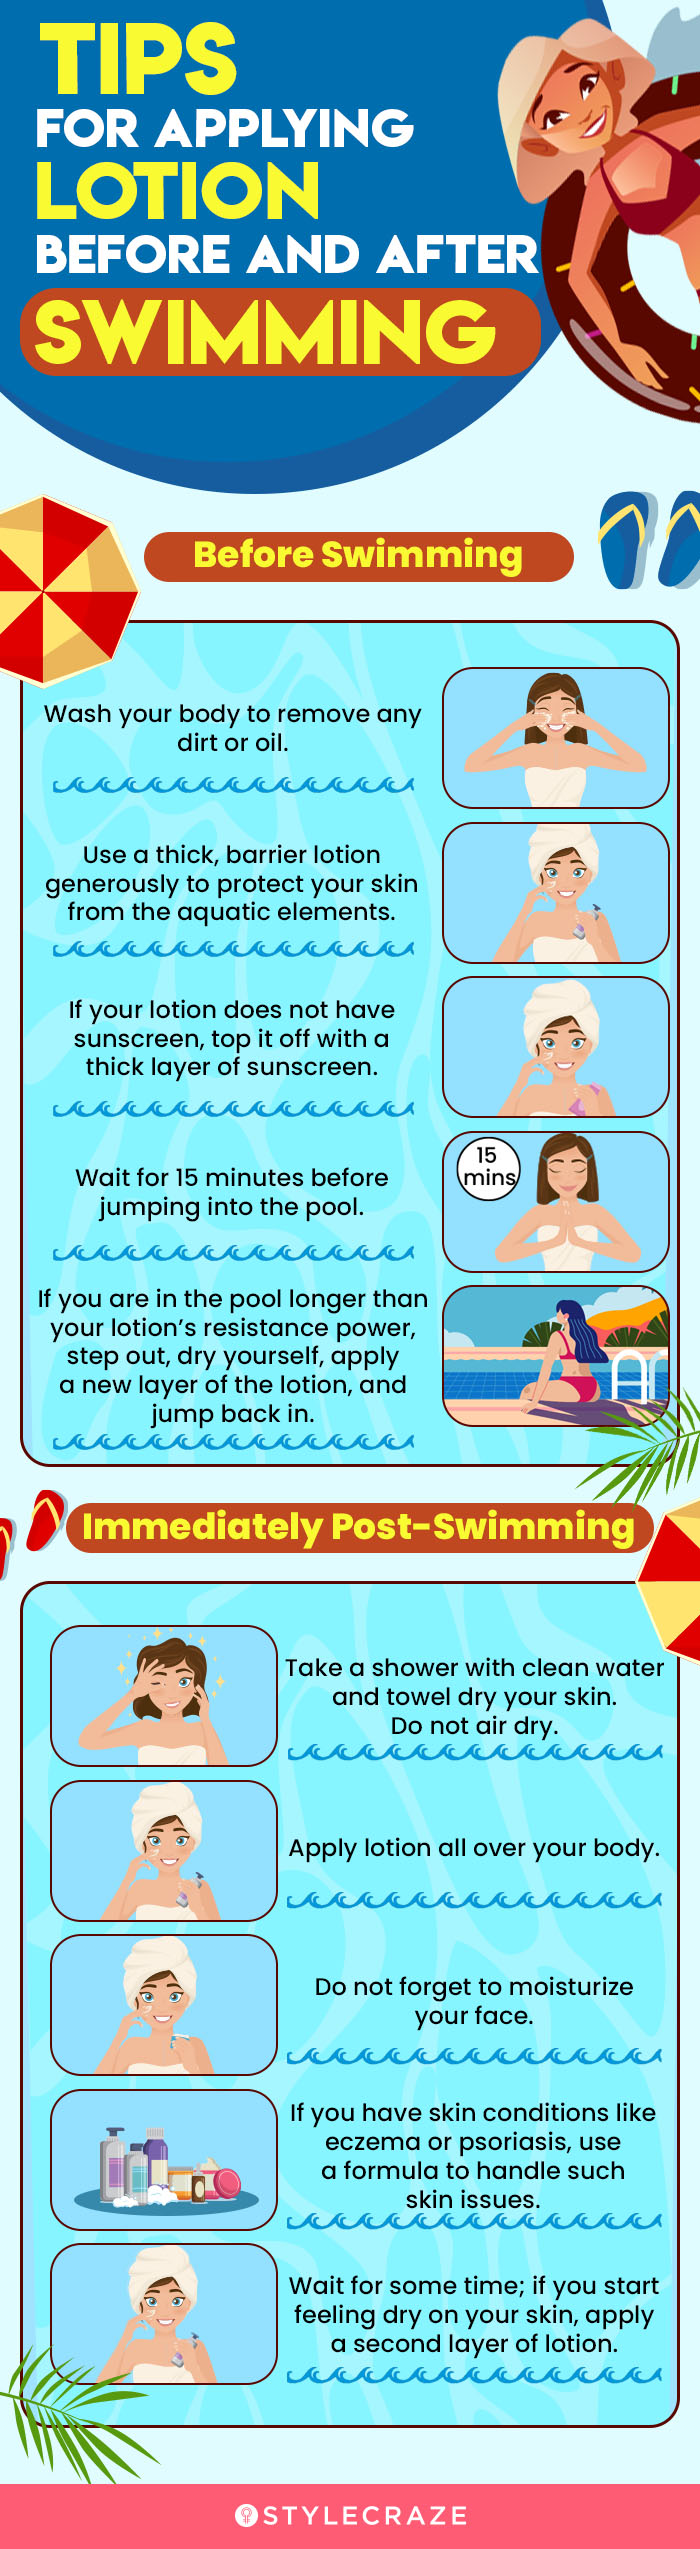 Tips For Applying Lotion Before And After Swimming